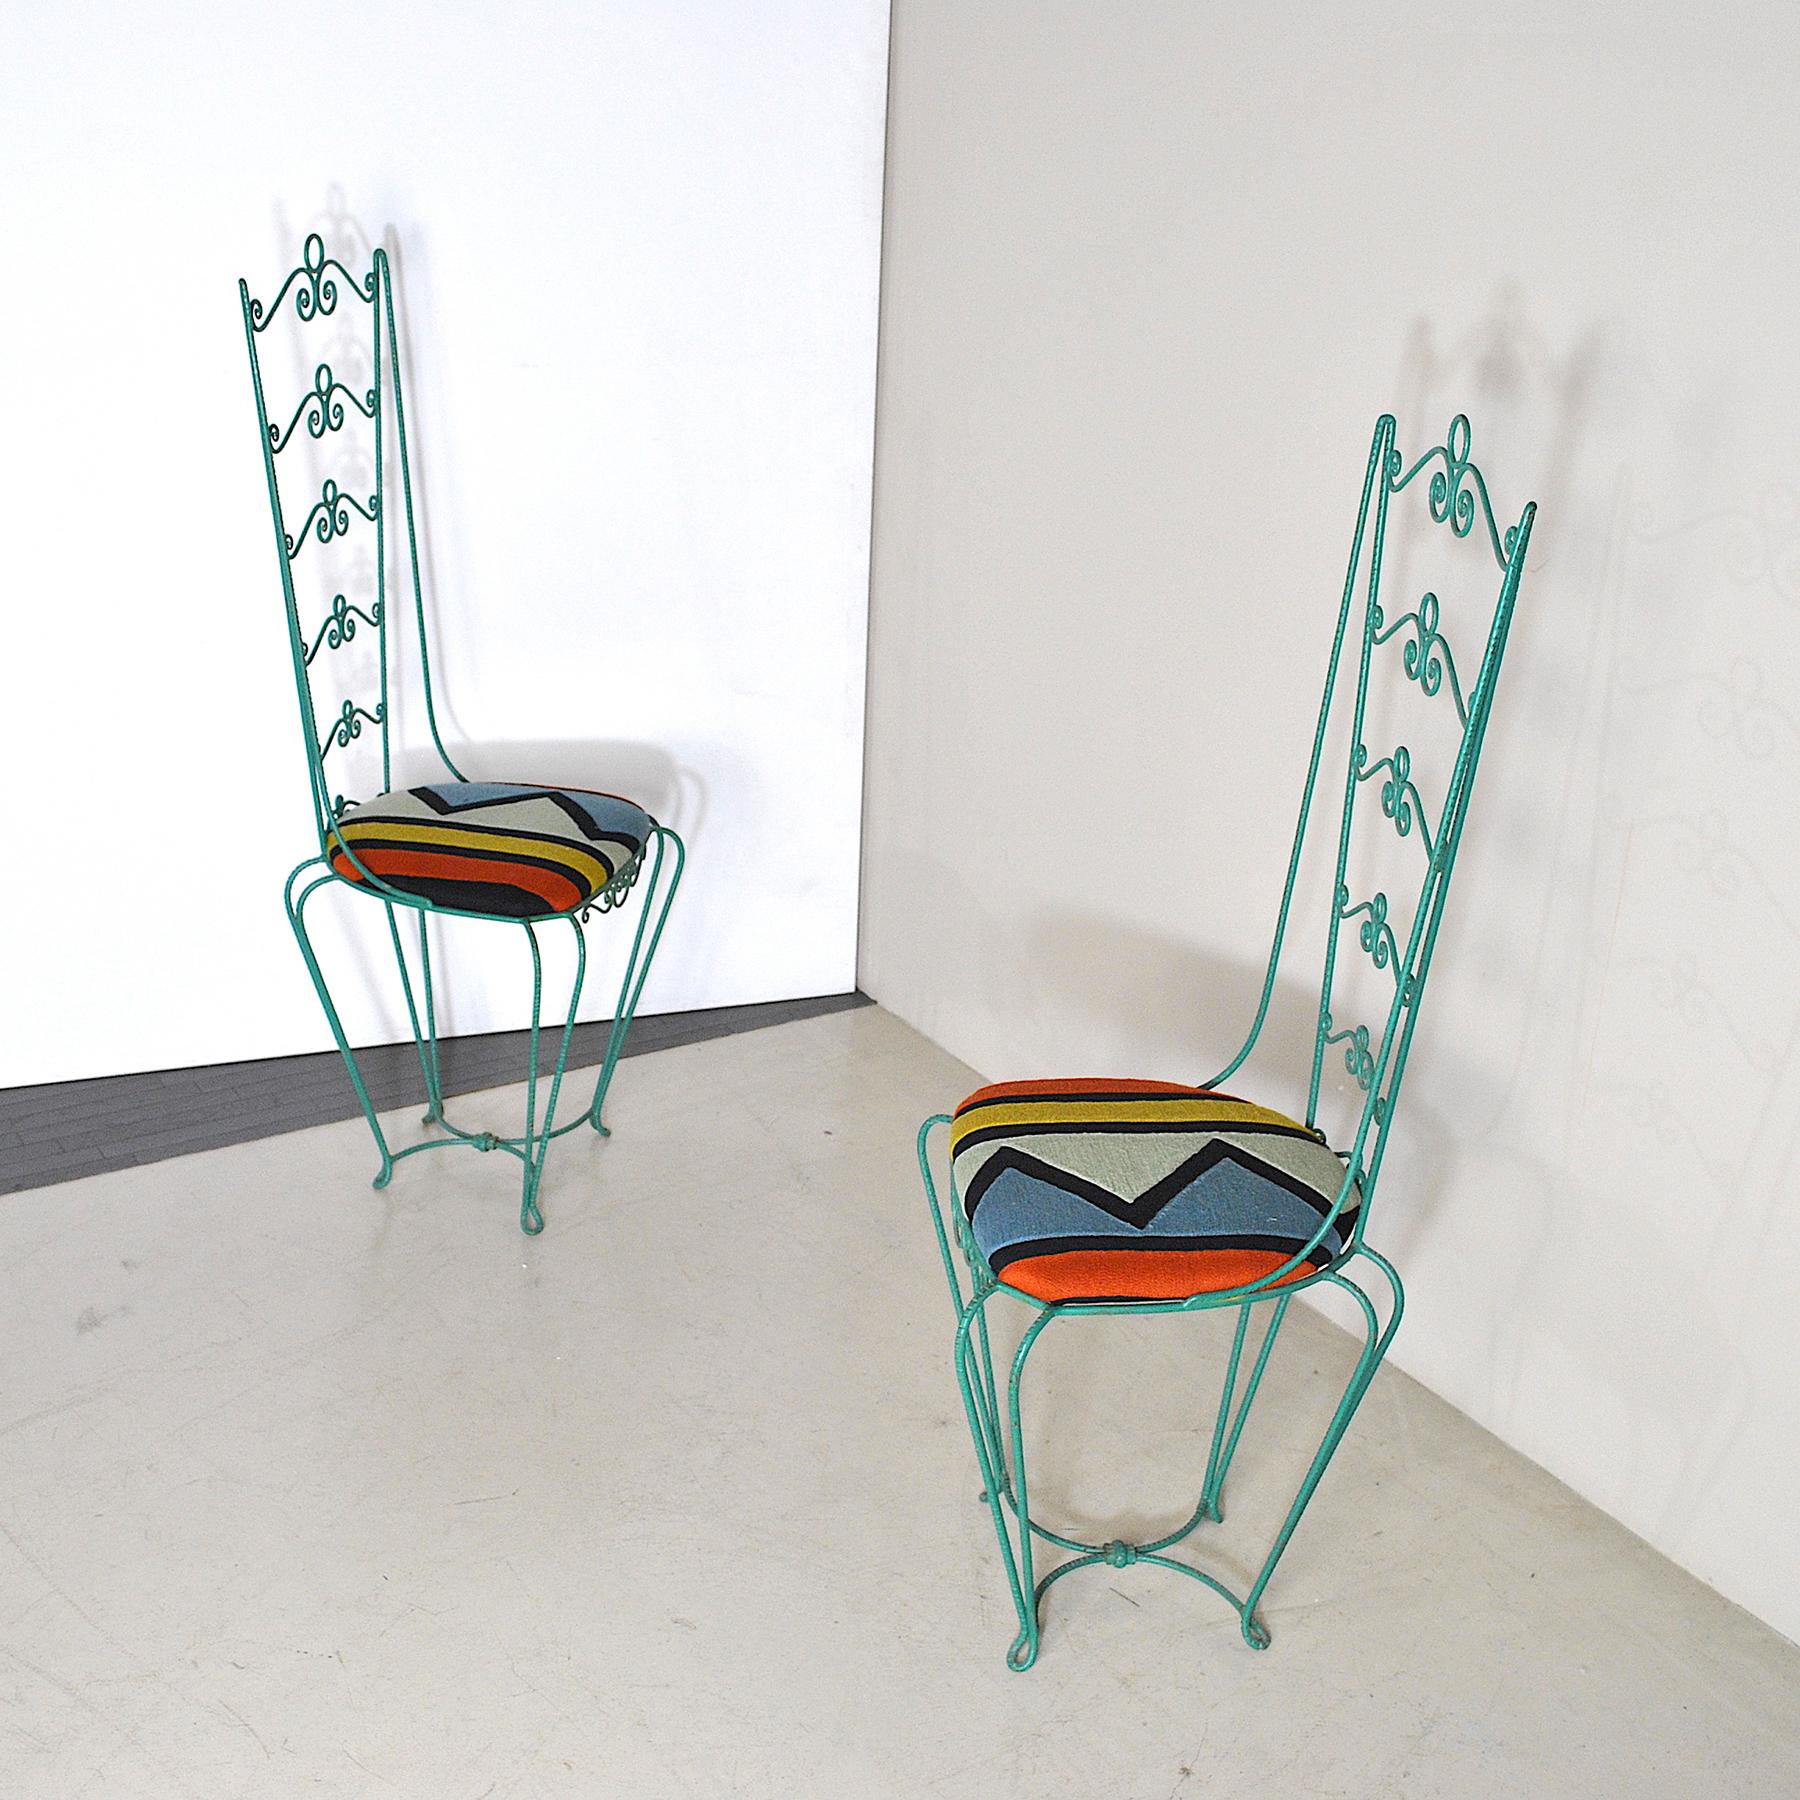 Pair of lacquered wrought iron chairs from the Italian school of the D’Andrea craftsman from Lecce from the late 1950s